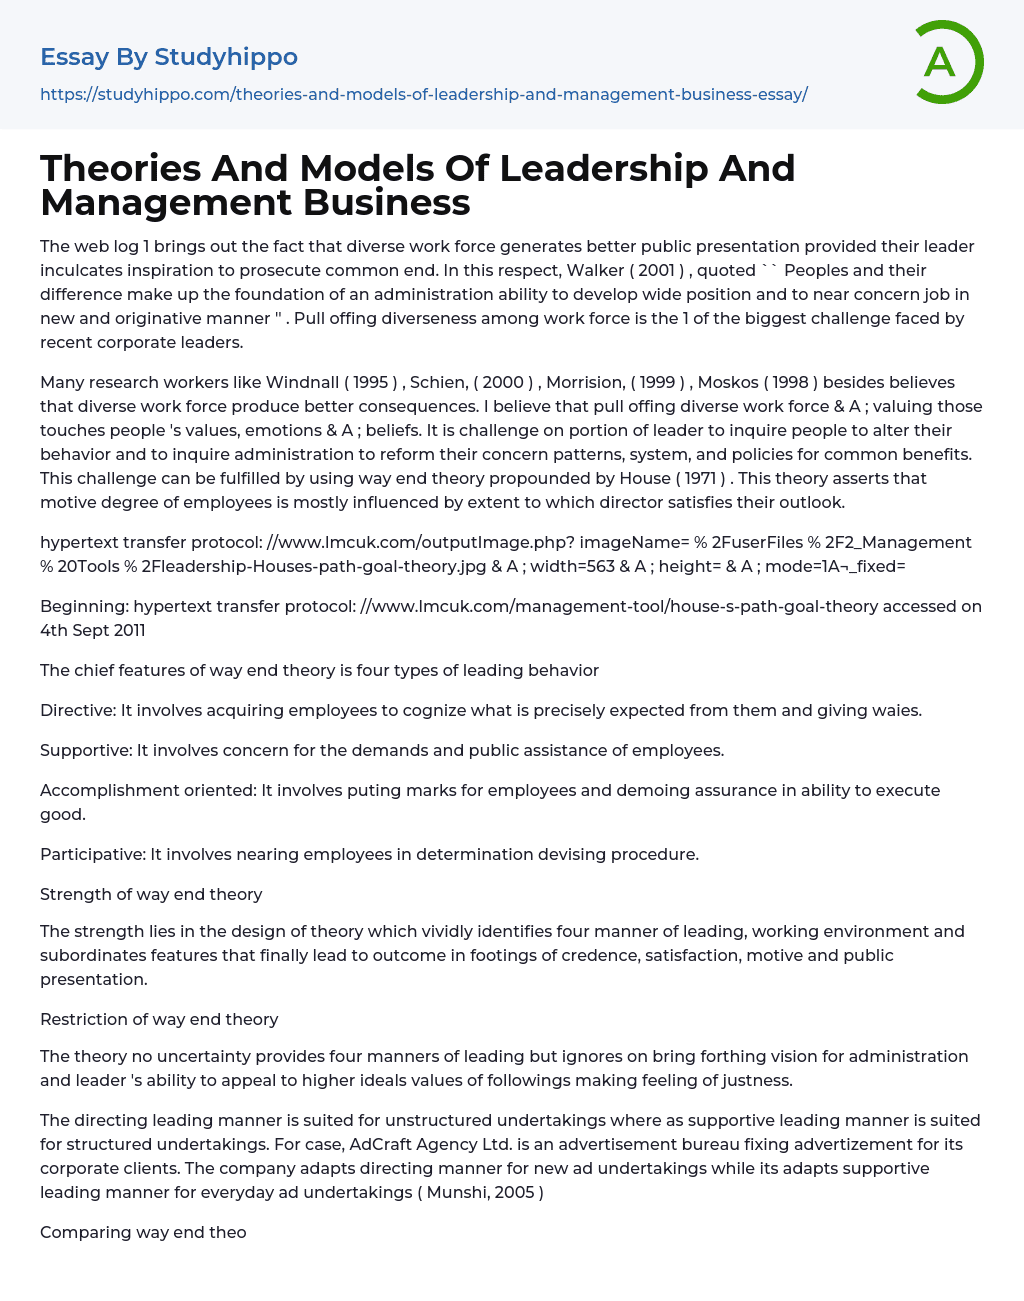 Theories And Models Of Leadership And Management Business Essay Example